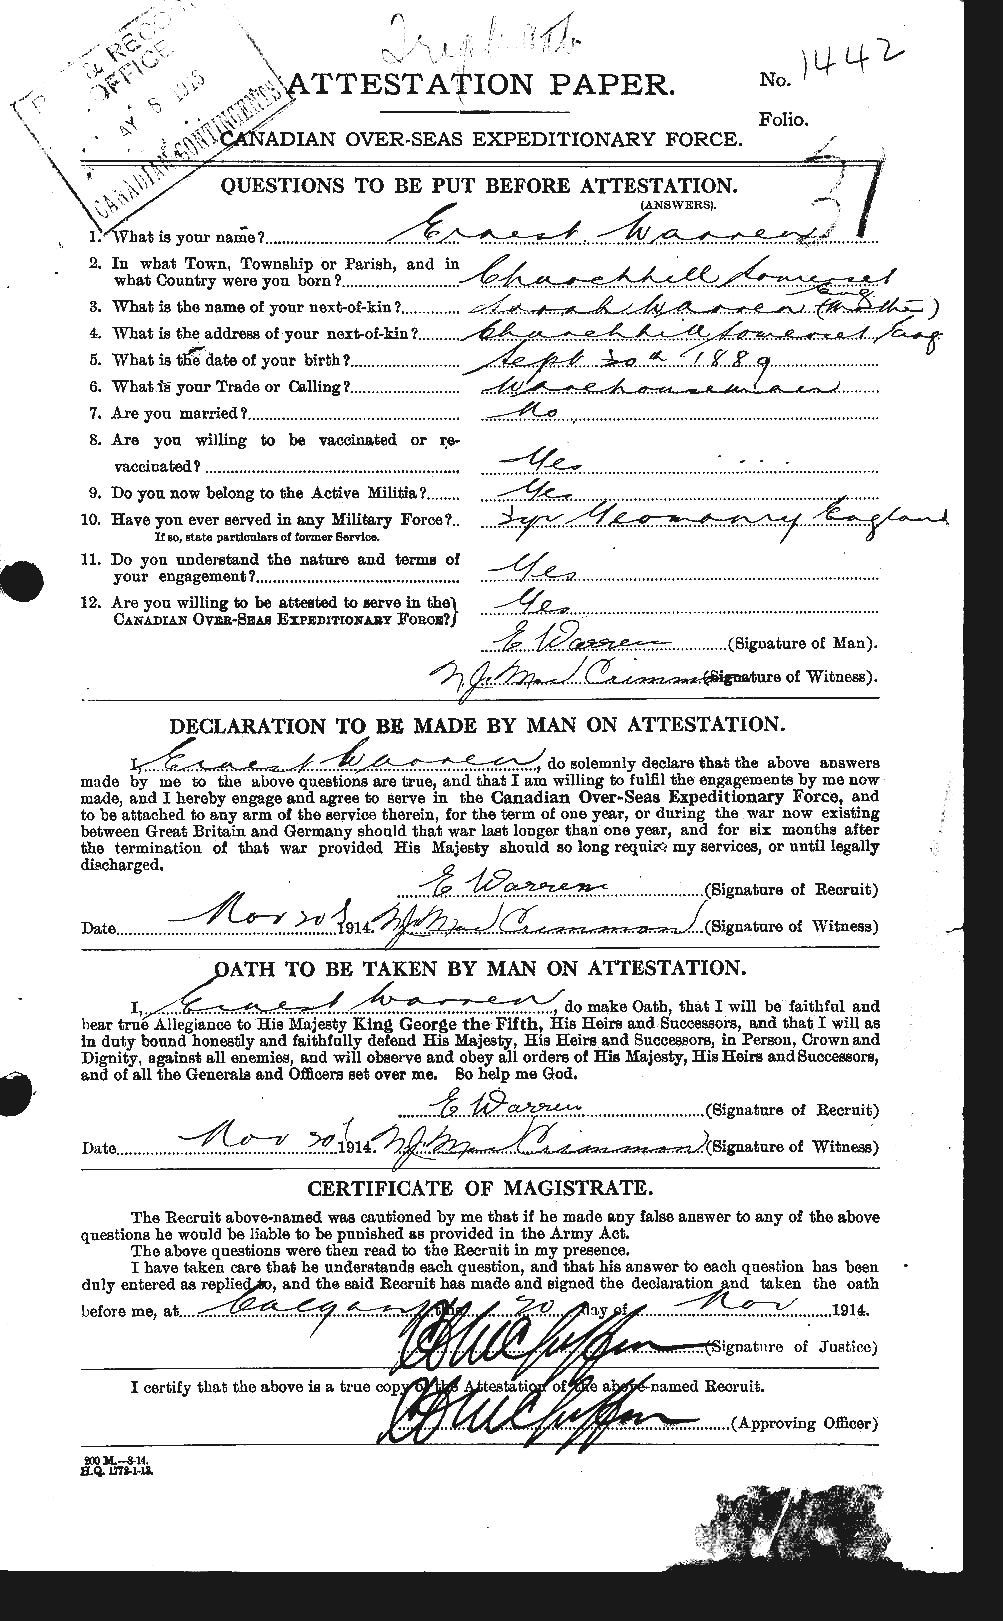 Personnel Records of the First World War - CEF 658423a